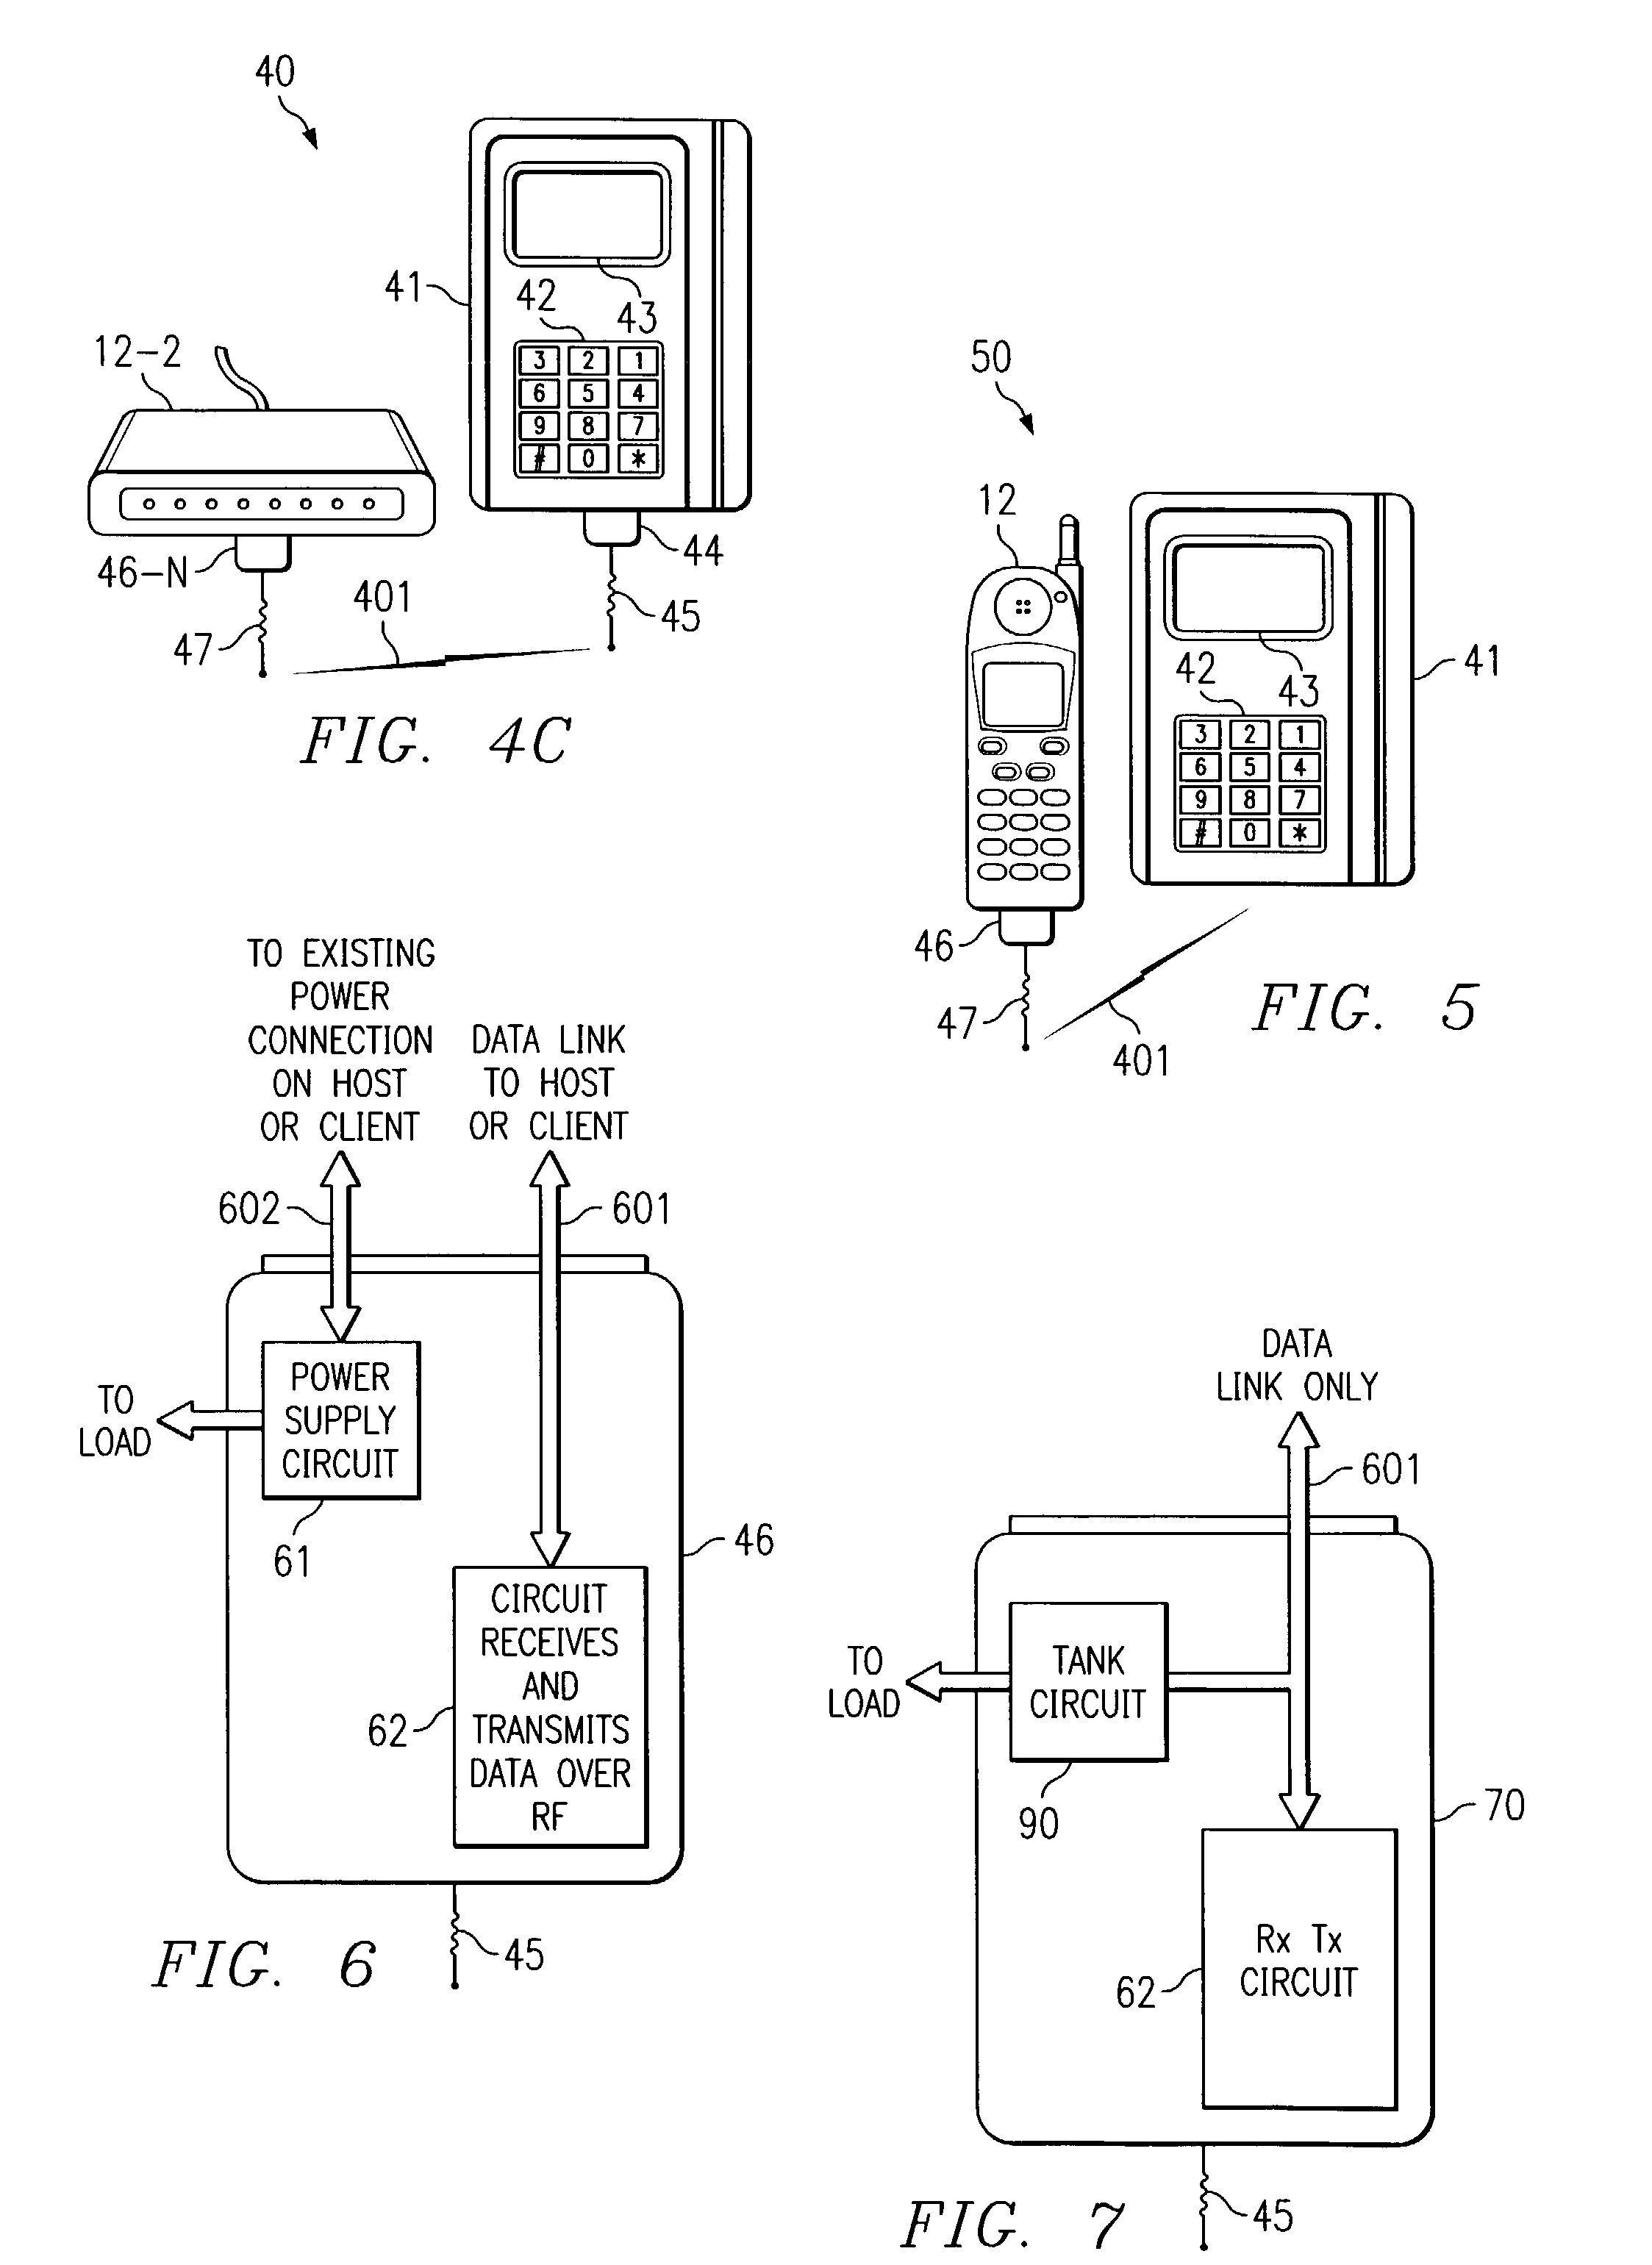 Short range wireless device interface with parasitic power supply